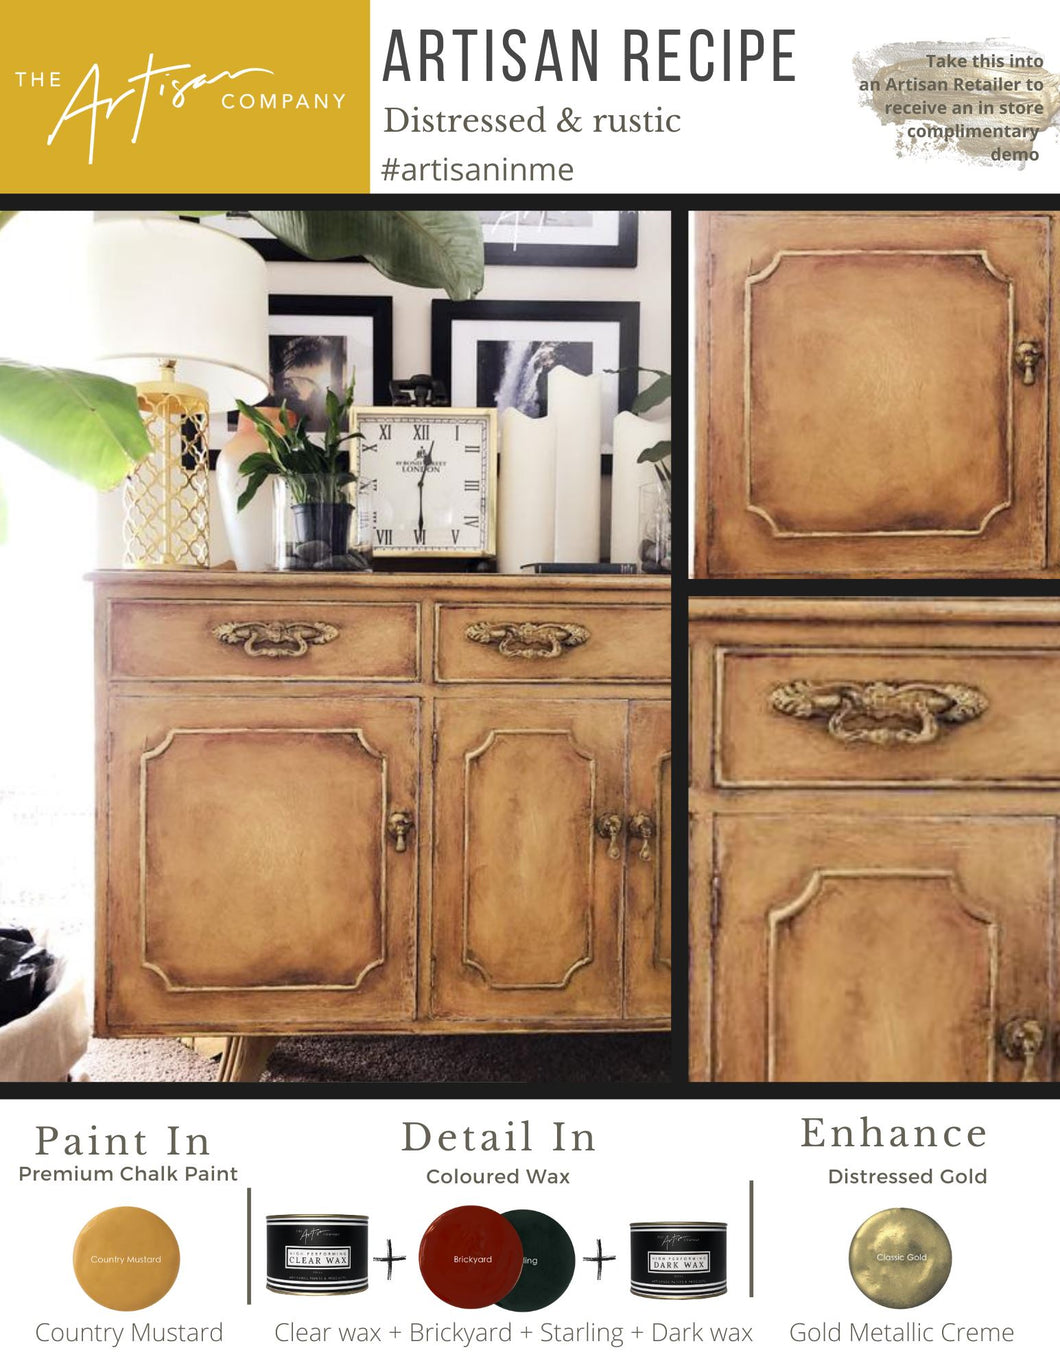 Artisan Paint Recipe - Distressed & Rustic in Country Mustard